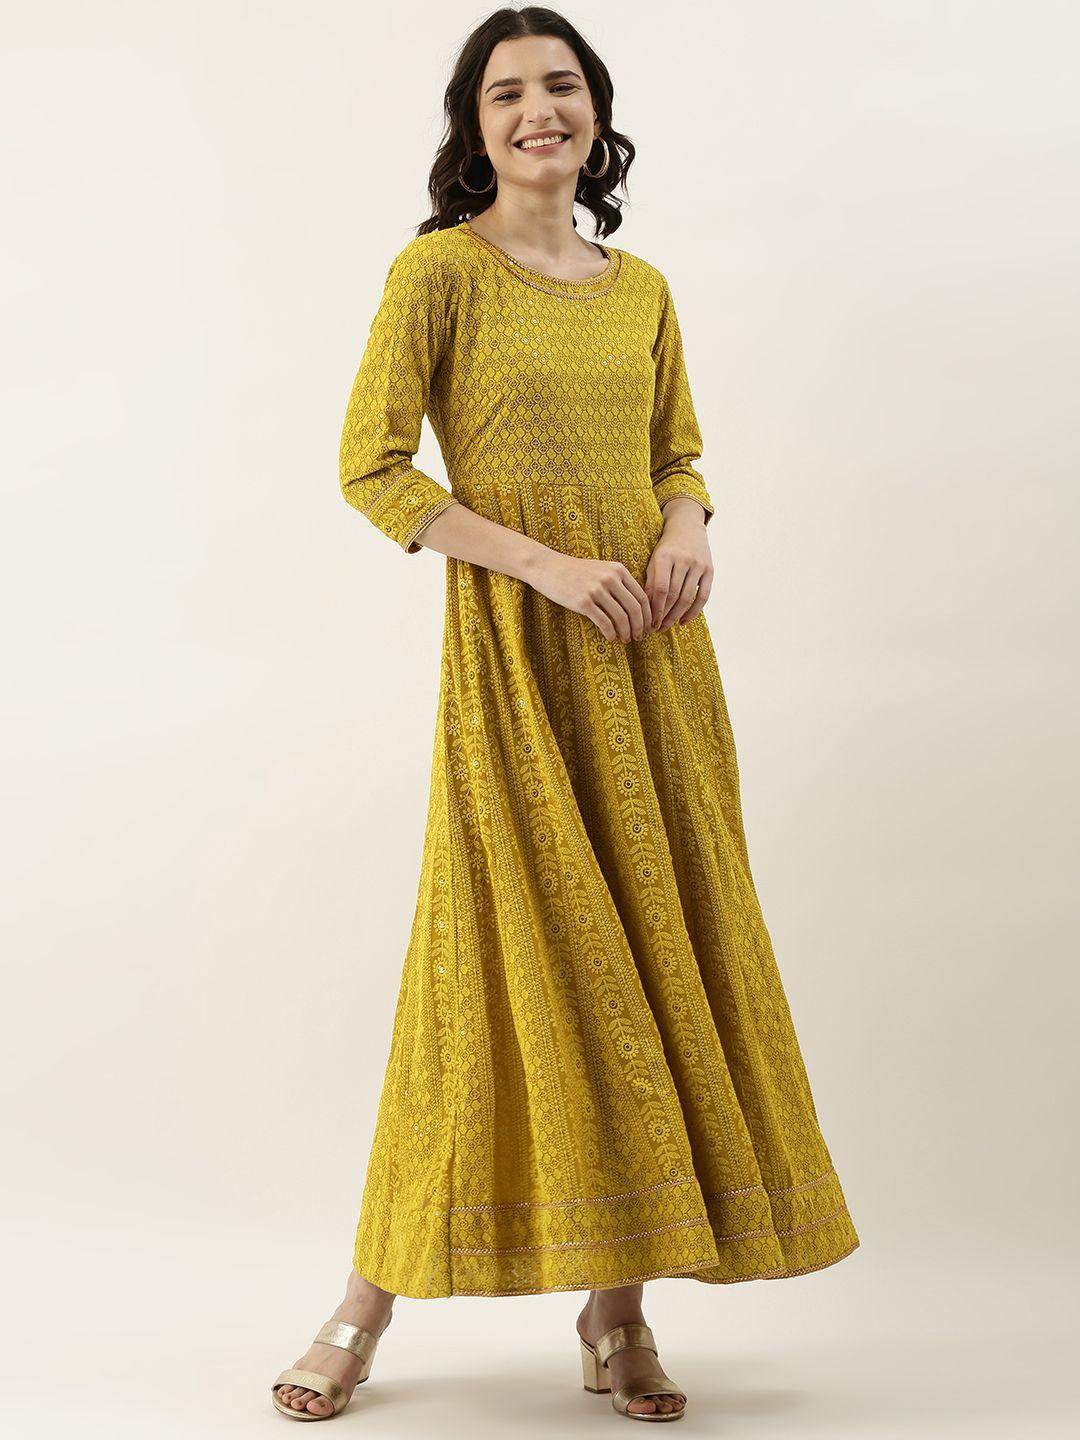 swagg india mustard yellow ethnic motifs embroidered georgette ethnic maxi dress